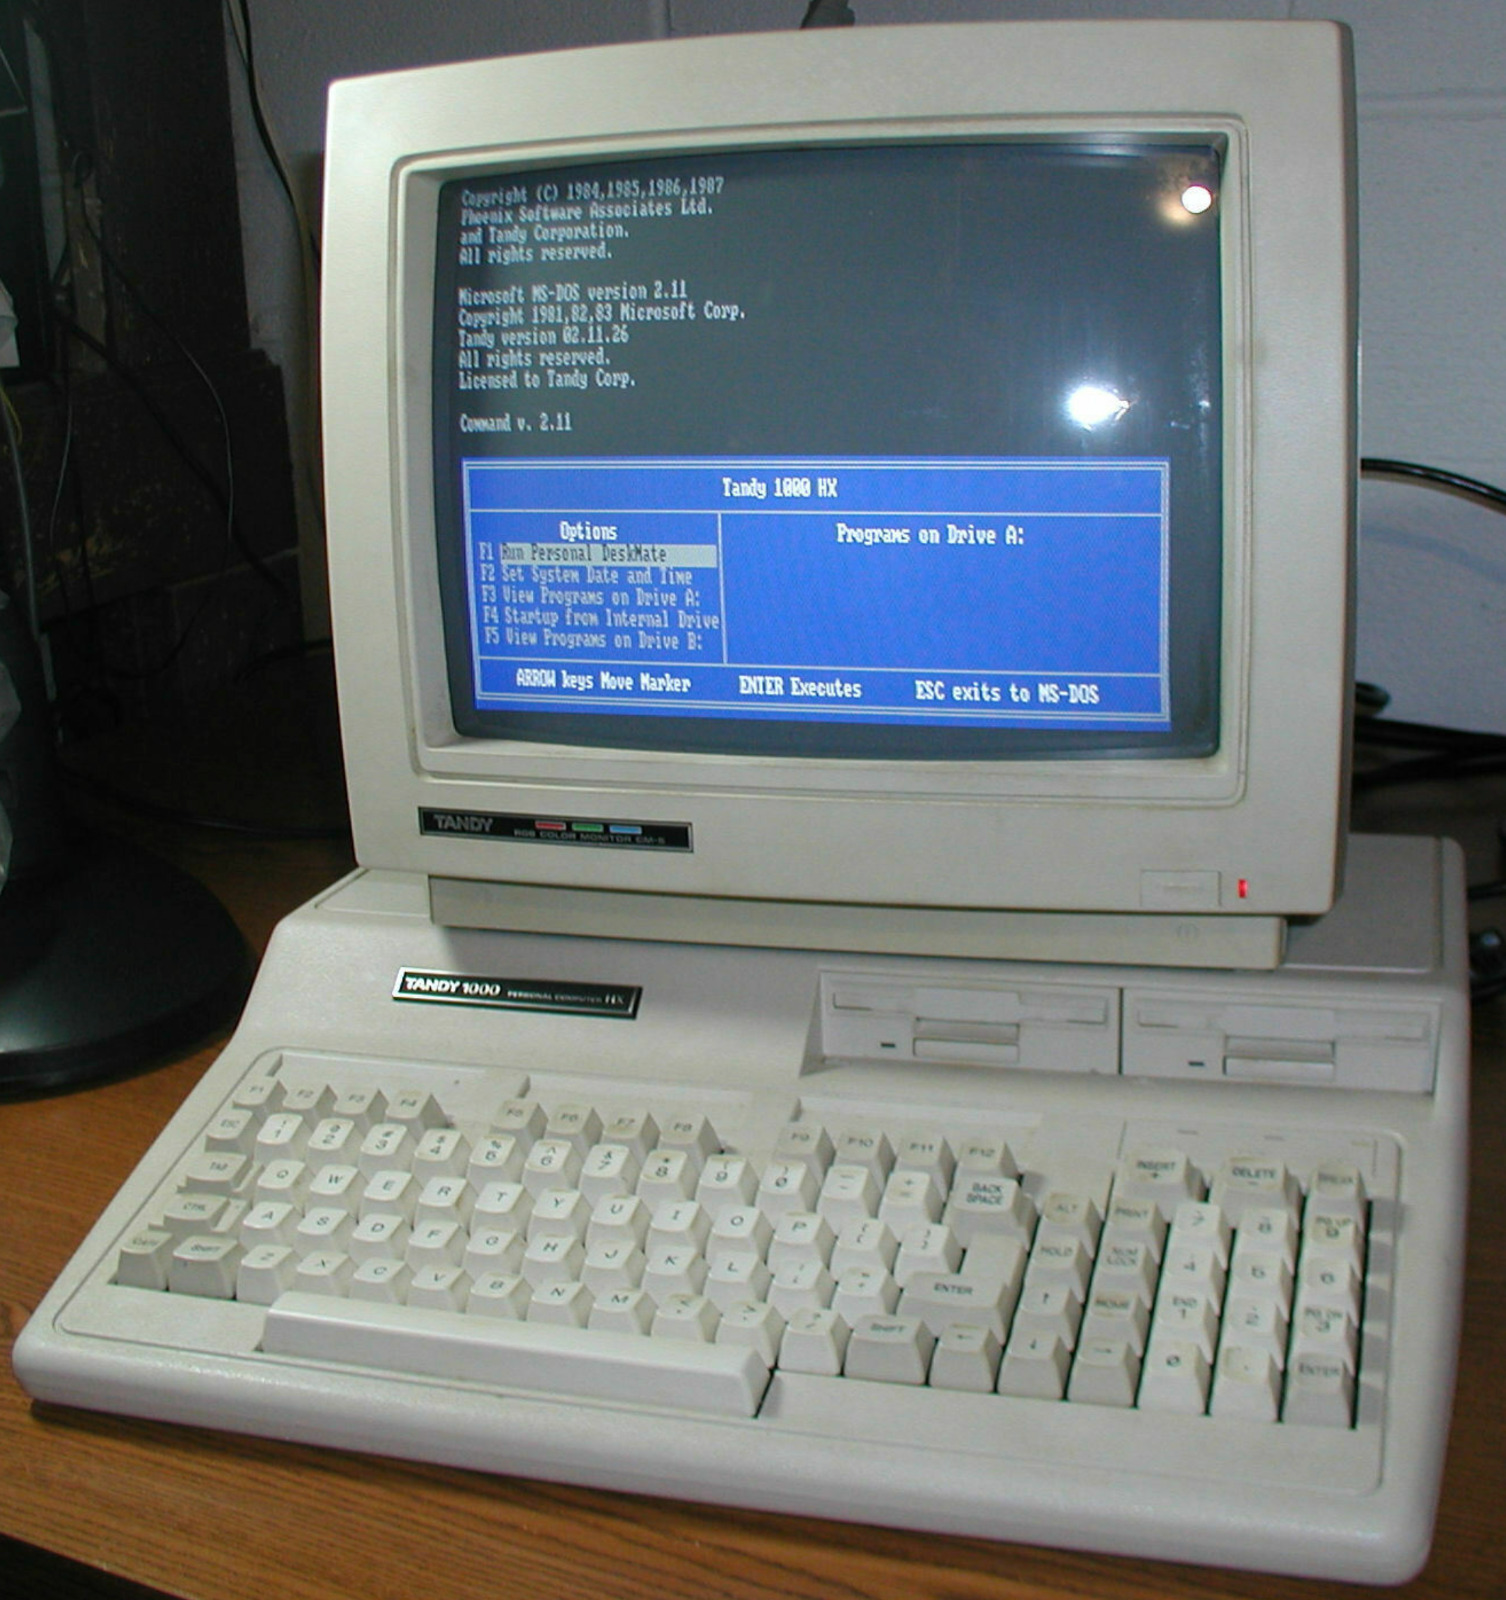 Tandy 1000 HX Boot system and Deskmate Disks / 3.5 Floppies   